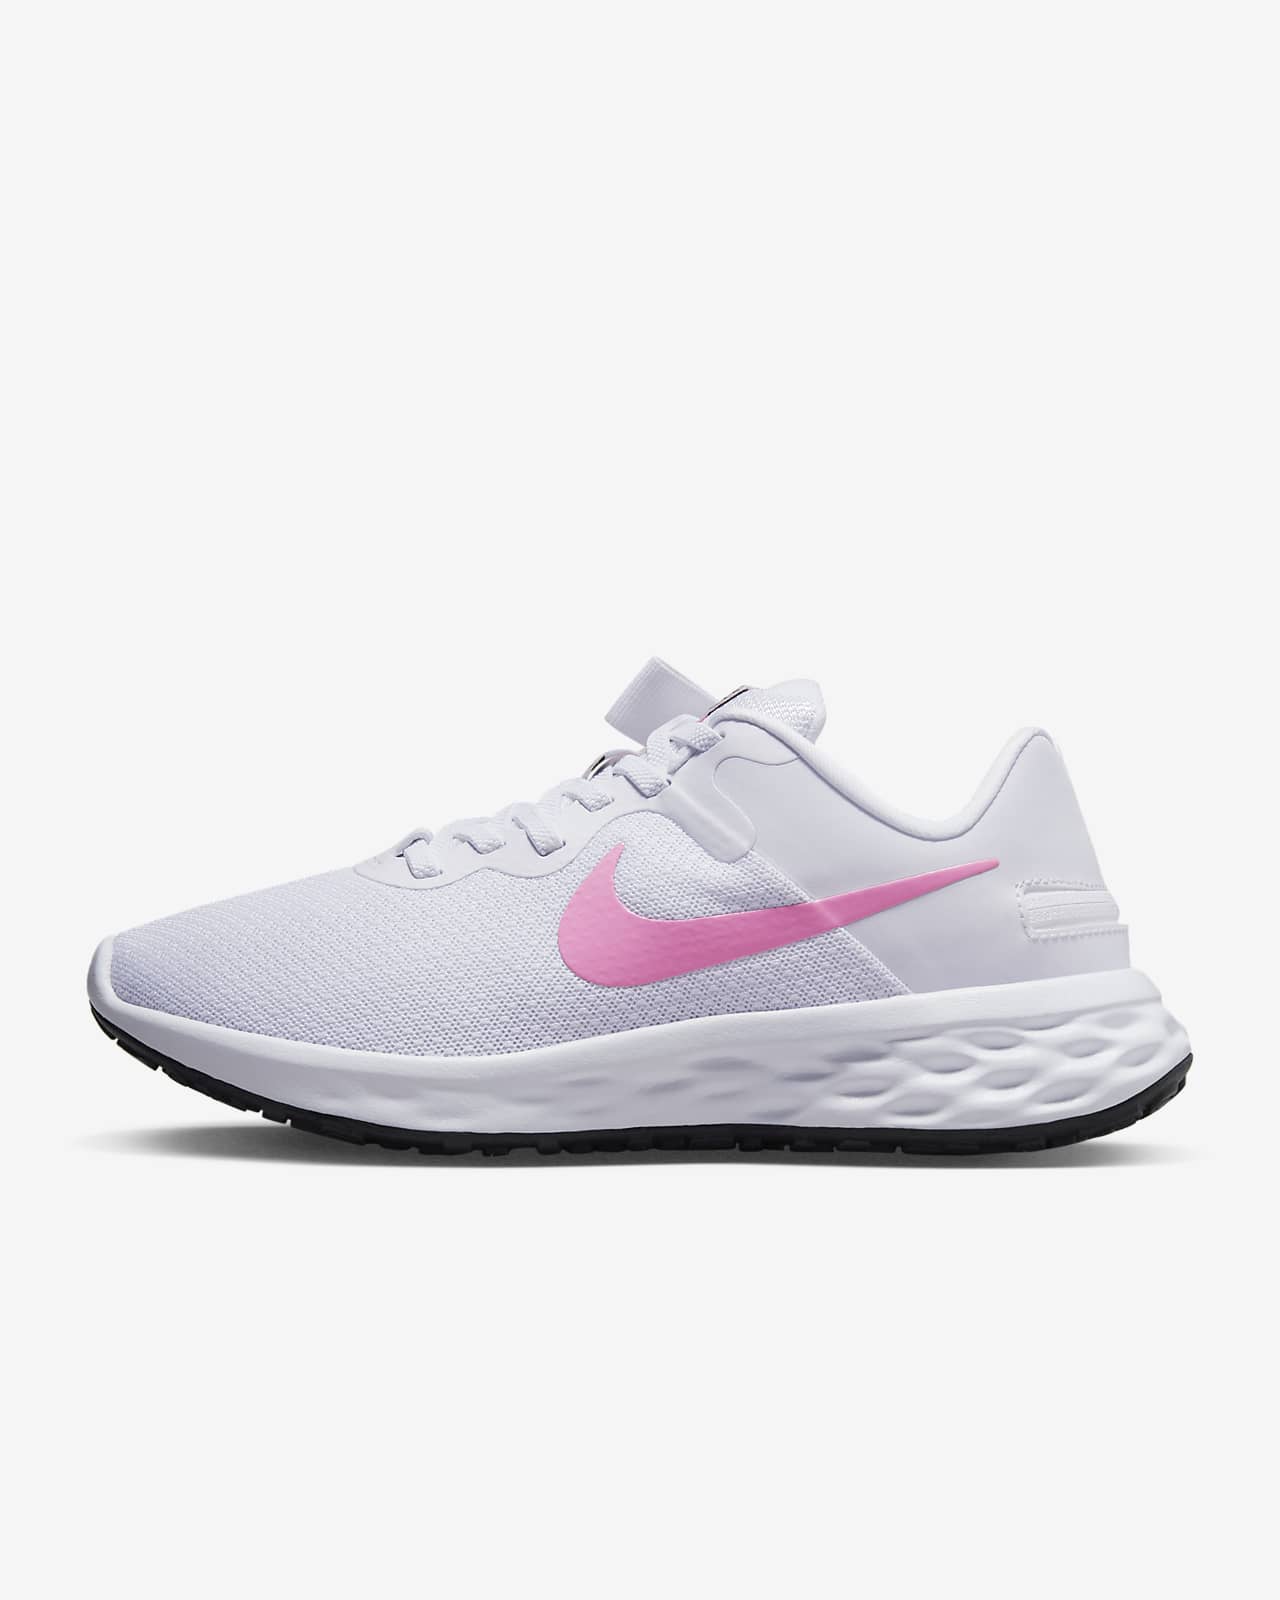 Nike Revolution 6 FlyEase Women's Easy On/Off Road Running Shoes. 